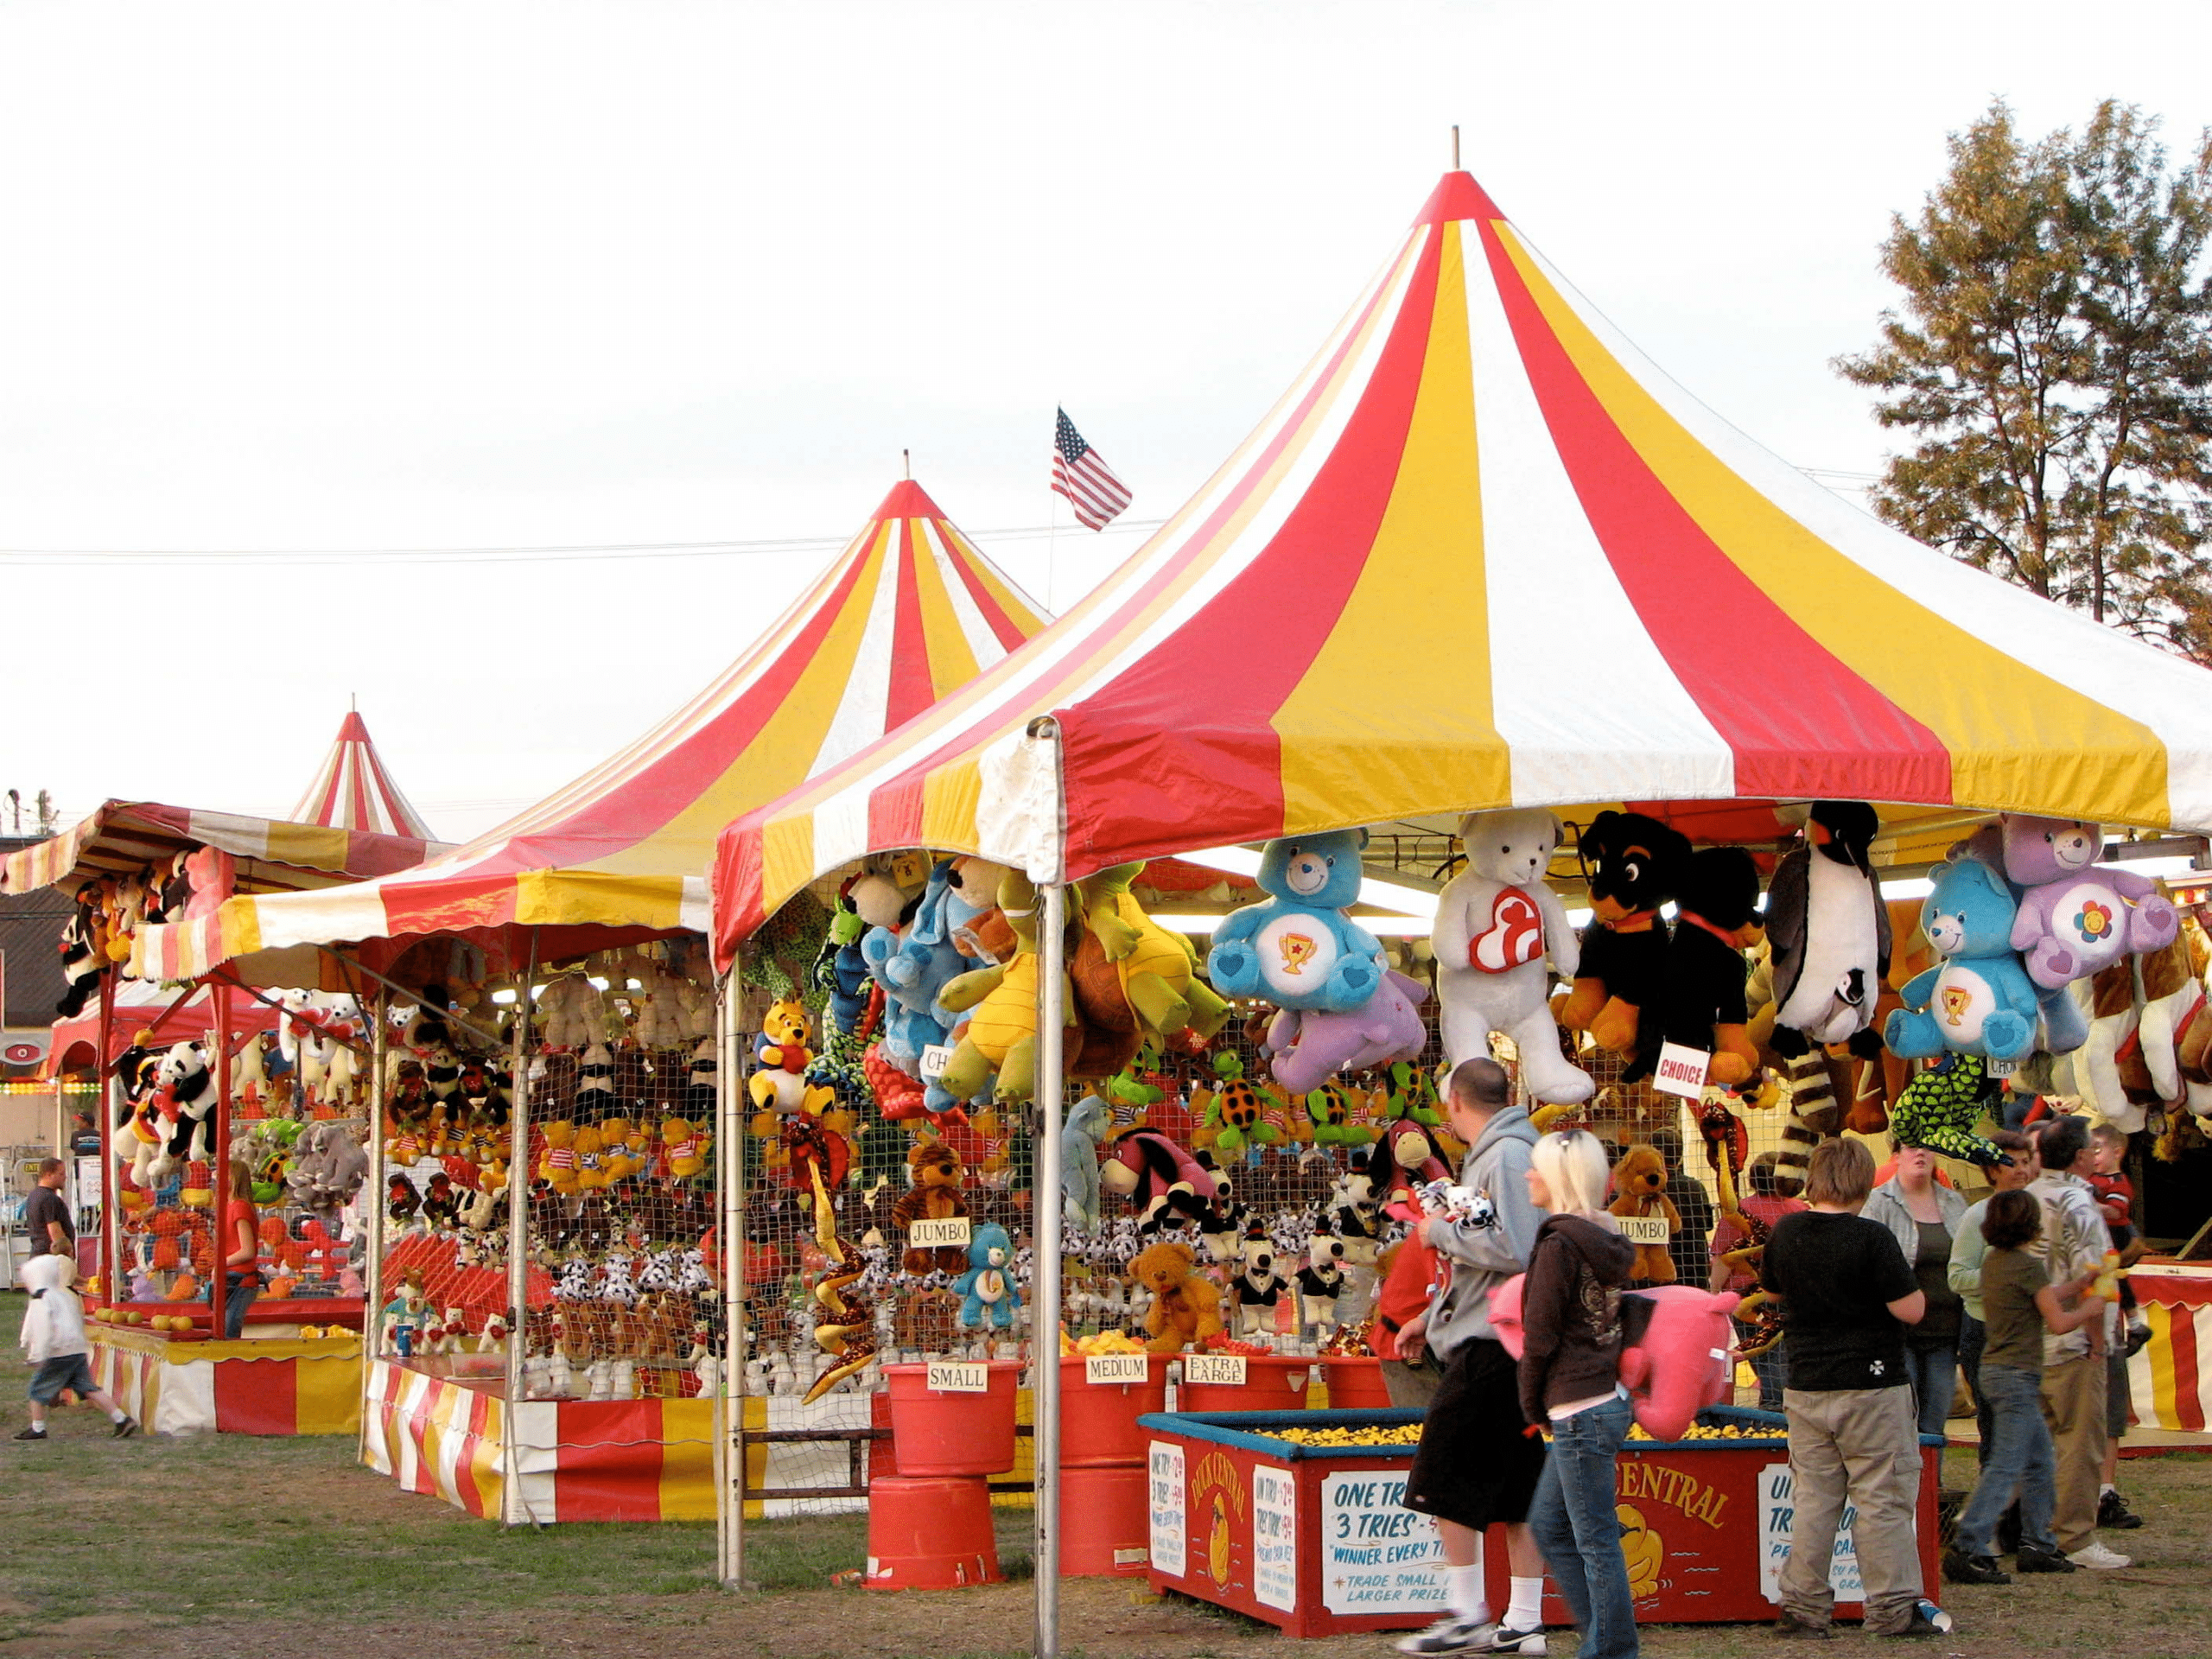 carnival tents full of toys and games